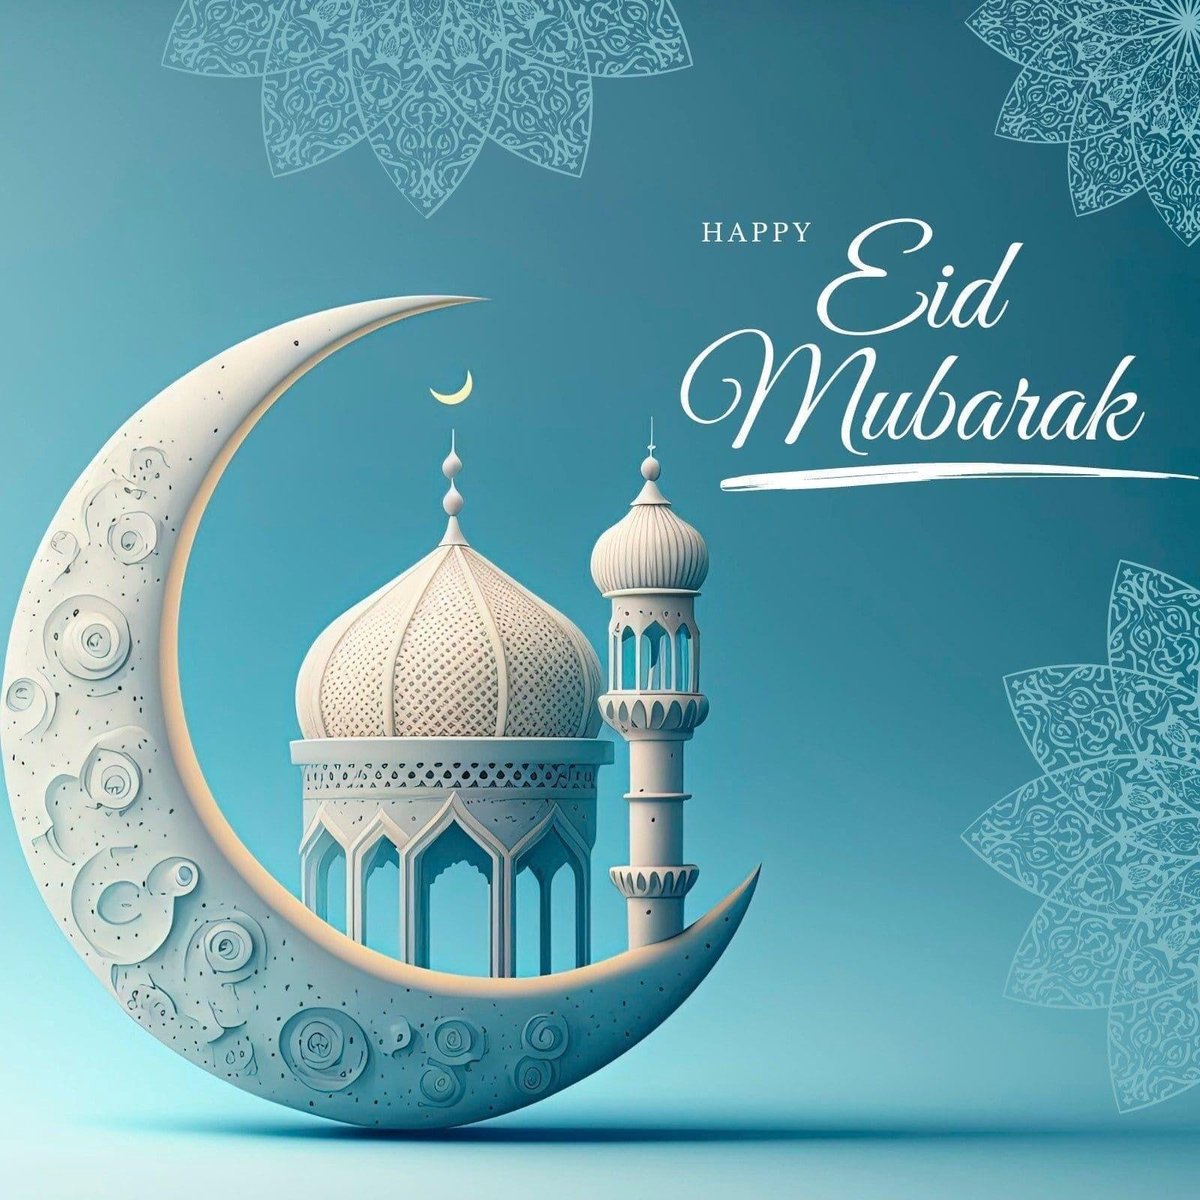 Sullivan Heights wishes you all a happy and blessed Eid Mubarak, happy holy month!

#sullistars #sd36learn #surreyschools
@Surrey_Schools